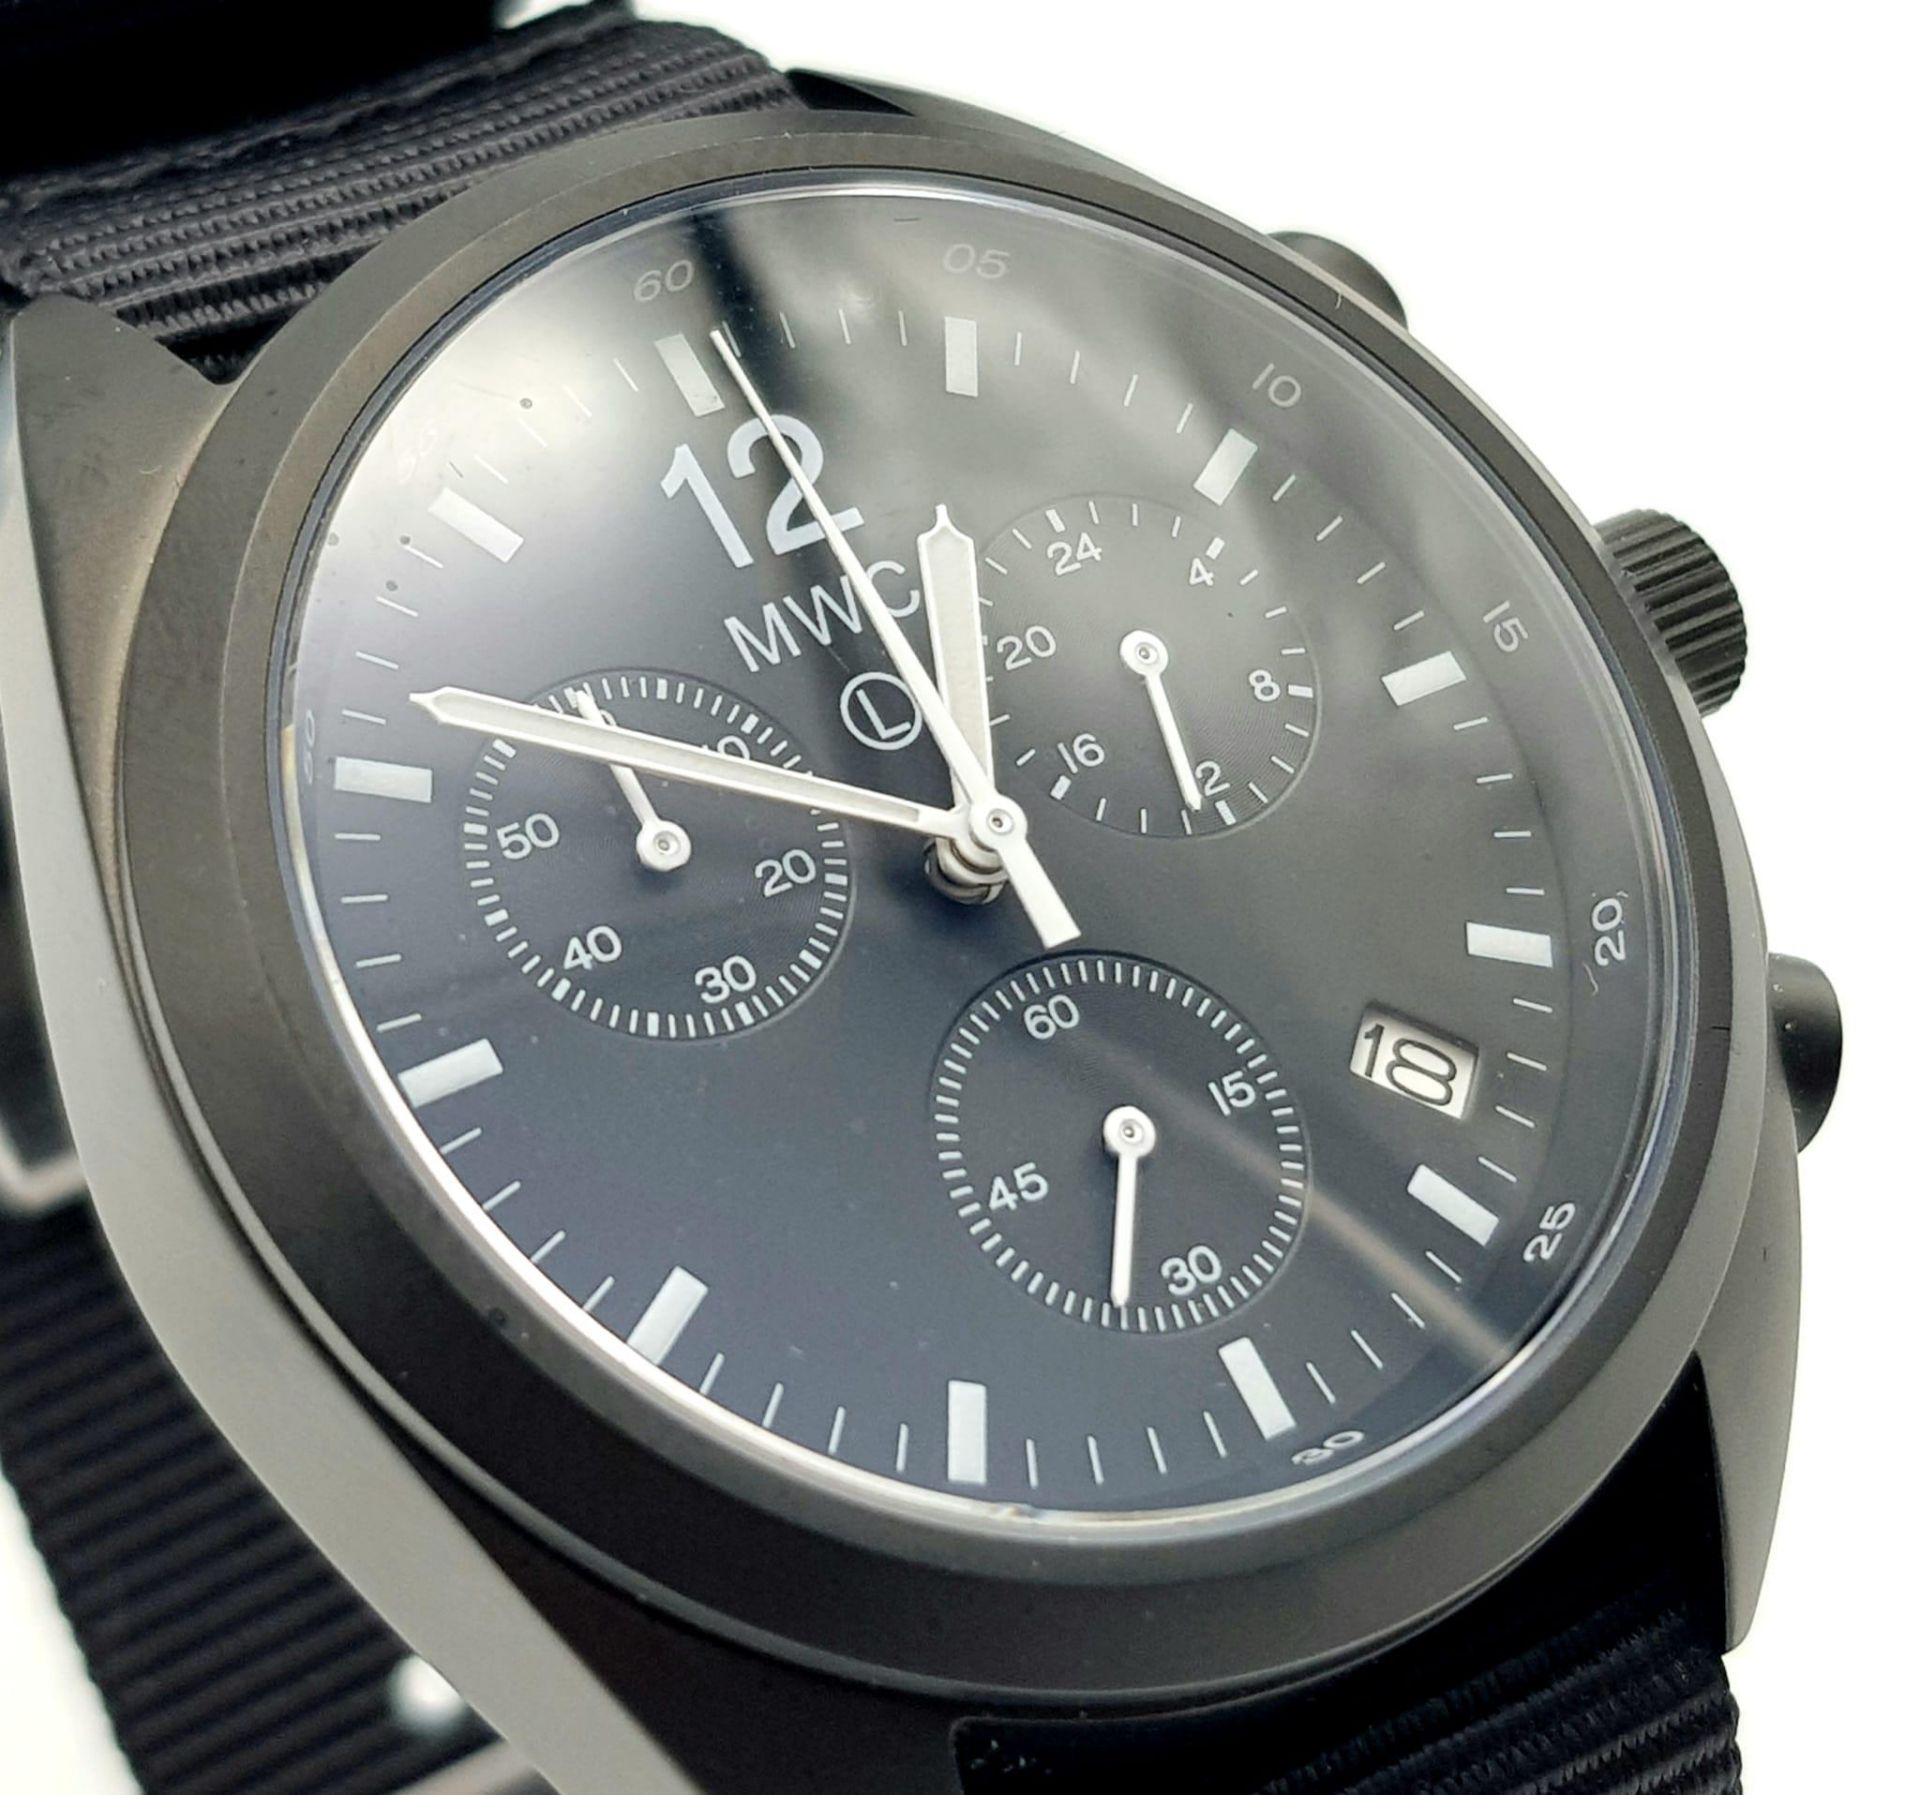 An Unworn, Full Military Specification, PVD Chronograph Watch by MWC (Military Watch Company). - Image 2 of 4